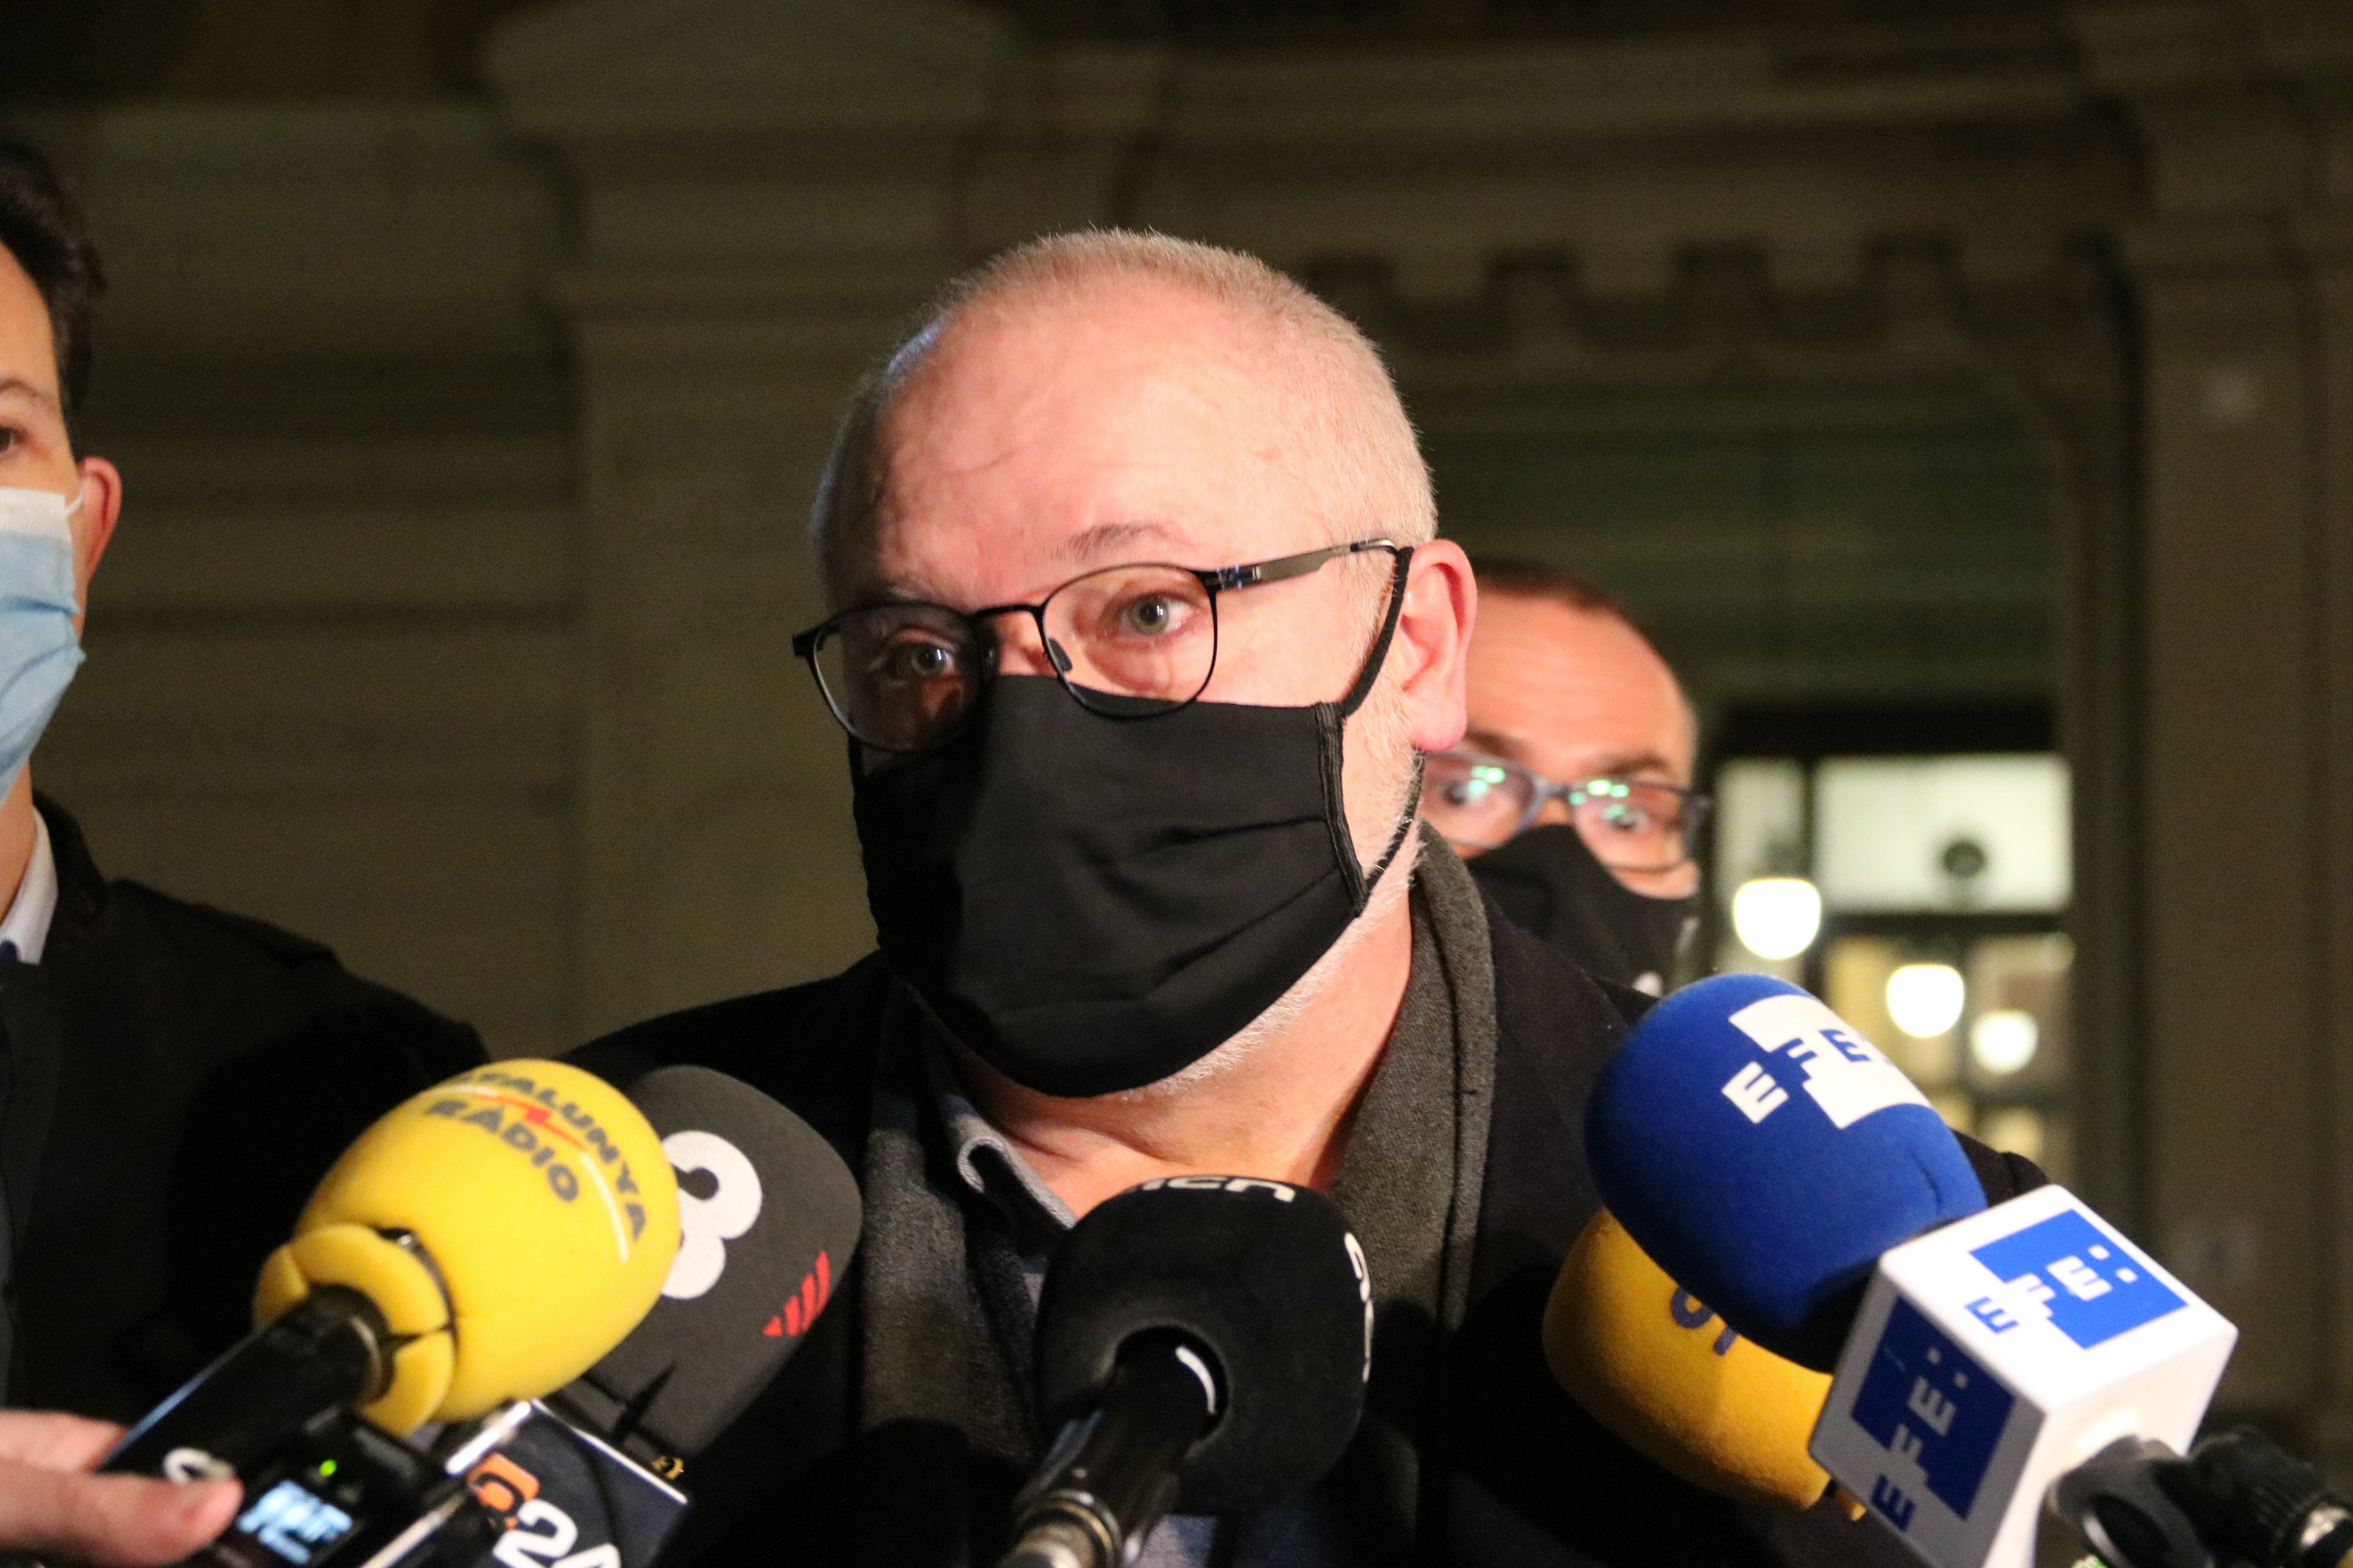 Belgium to rule on extradition of Catalan politician Lluís Puig on January 7th